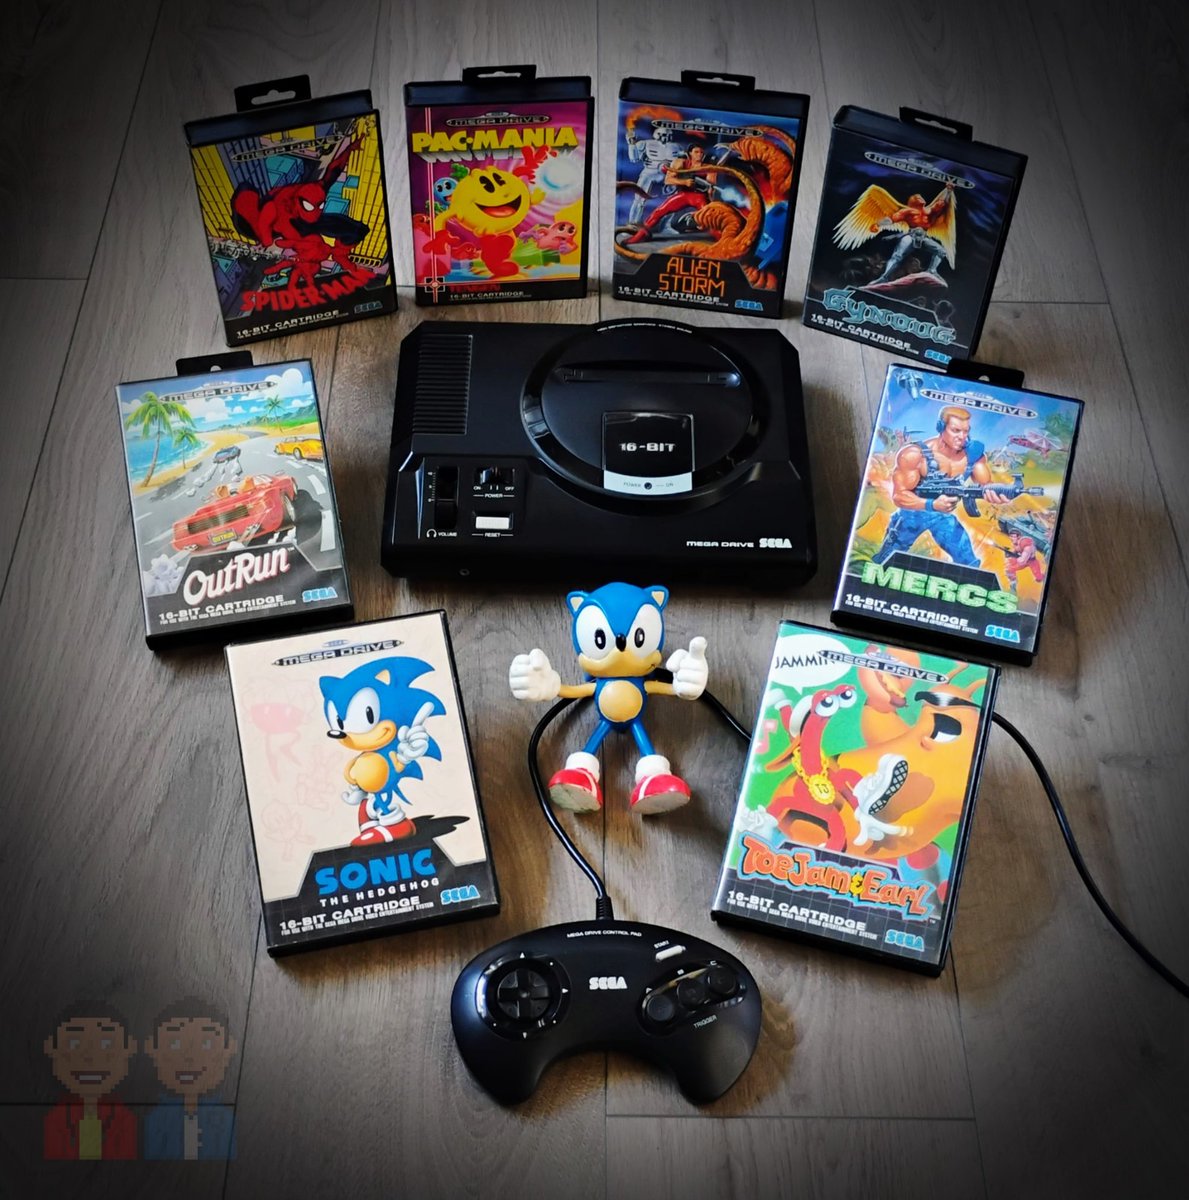 Blast processing back to 1991 for #MegadriveMonday!
The year had some terrific games arrive for #SEGA's #Megadrive, but none made an impact like #SonicTheHedgehog!

Was '91 the beginning of a turning point for the #console?

#GamersUnite #RETROGAMING #retogamer #retrogames #Retro